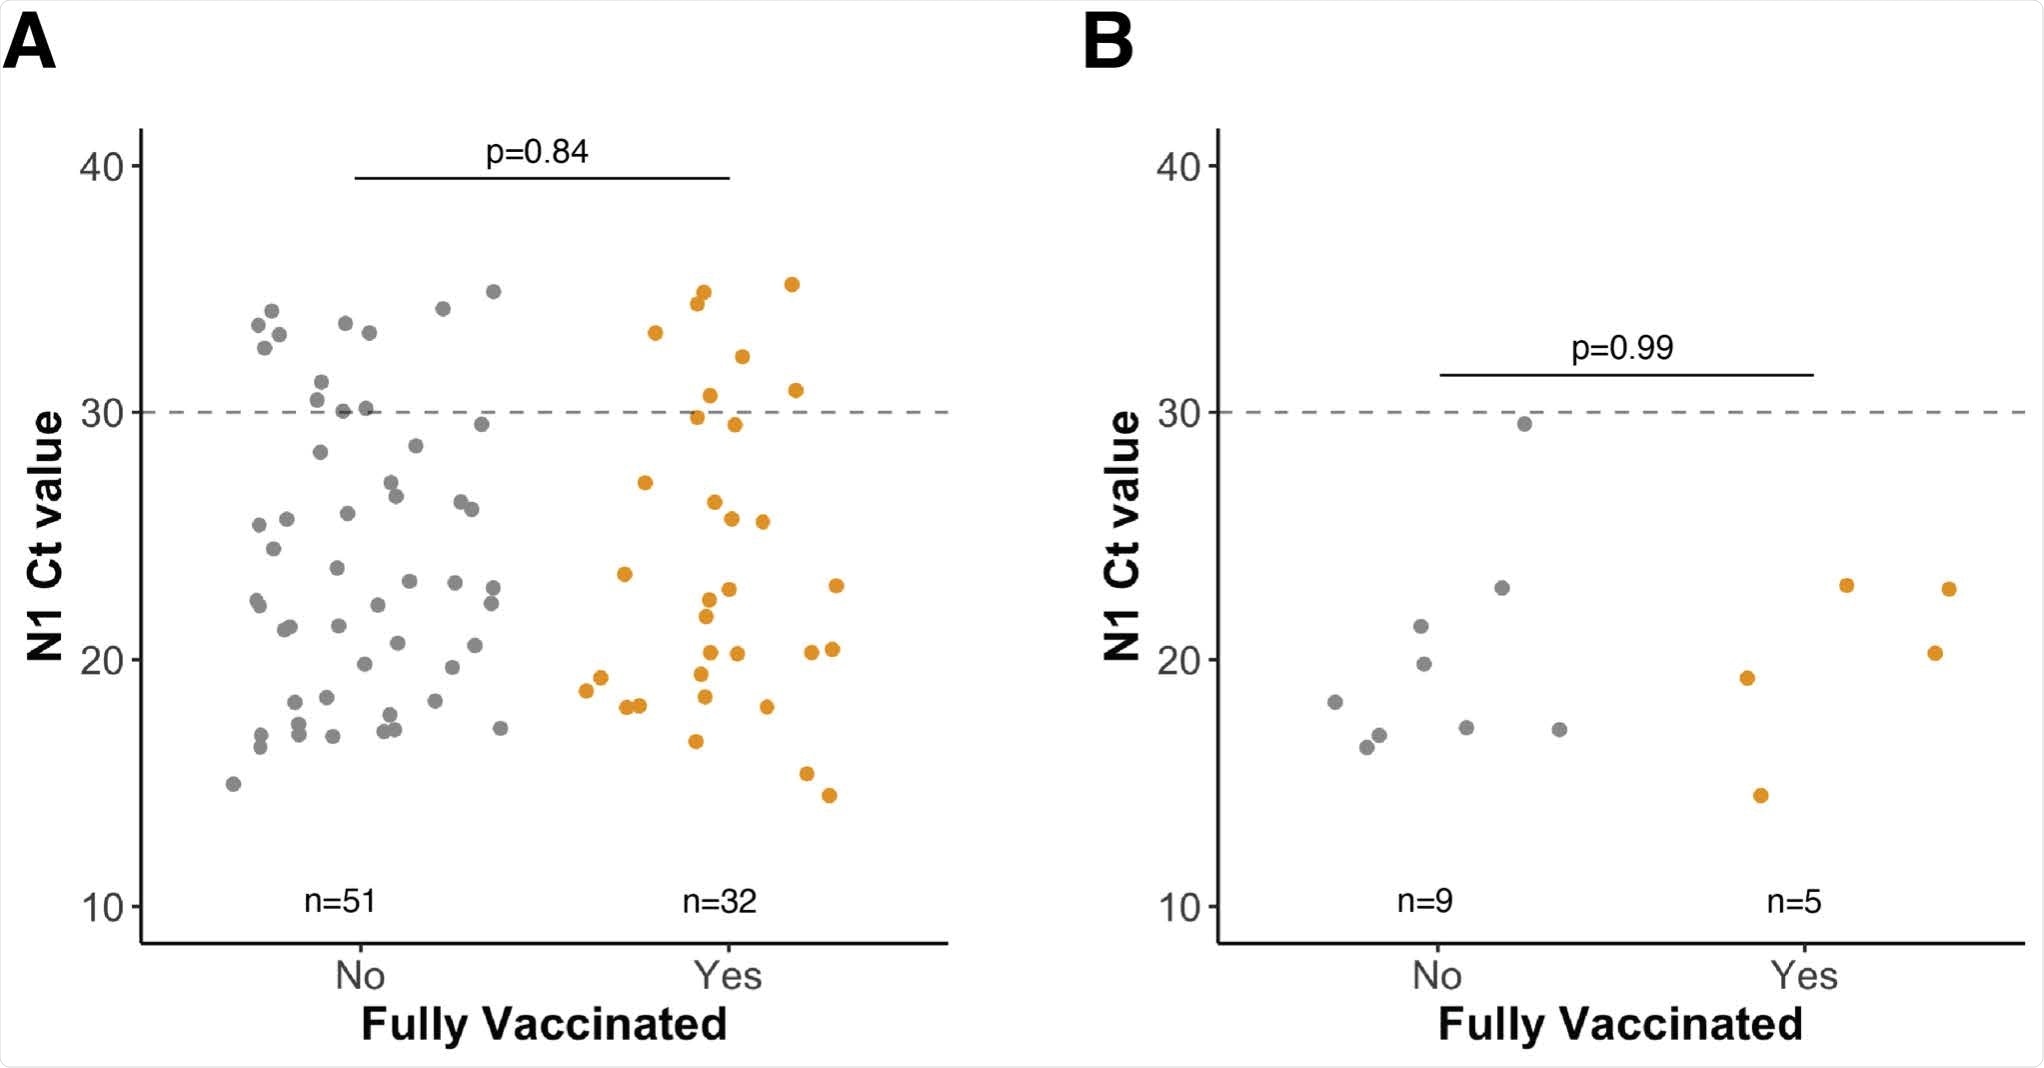 Viral loads for Dane County specimens are independent of vaccination status. A) N1 threshold cycle (Ct) values for SARS-CoV-2-positive specimens grouped by vaccination status. B) N1 Ct values for SARS-CoV-2-positive specimens confirmed to be delta variants by sequencing. In A and B, the horizontal dashed line represents the threshold for consistent recovery of infectious virus as well as our Ct cut-off for sequencing specimens. Sequence data were available only for specimens collected on or before 16 July 2021, not all samples had a Ct < 30, and not all samples with a Ct < 30 sequenced successfully, accounting for the relatively low number of delta confirmed sequences. P-values were calculated by comparing mean Ct values between groups by Welch two sample t-tests. Data from the Dane County cohort are shown.